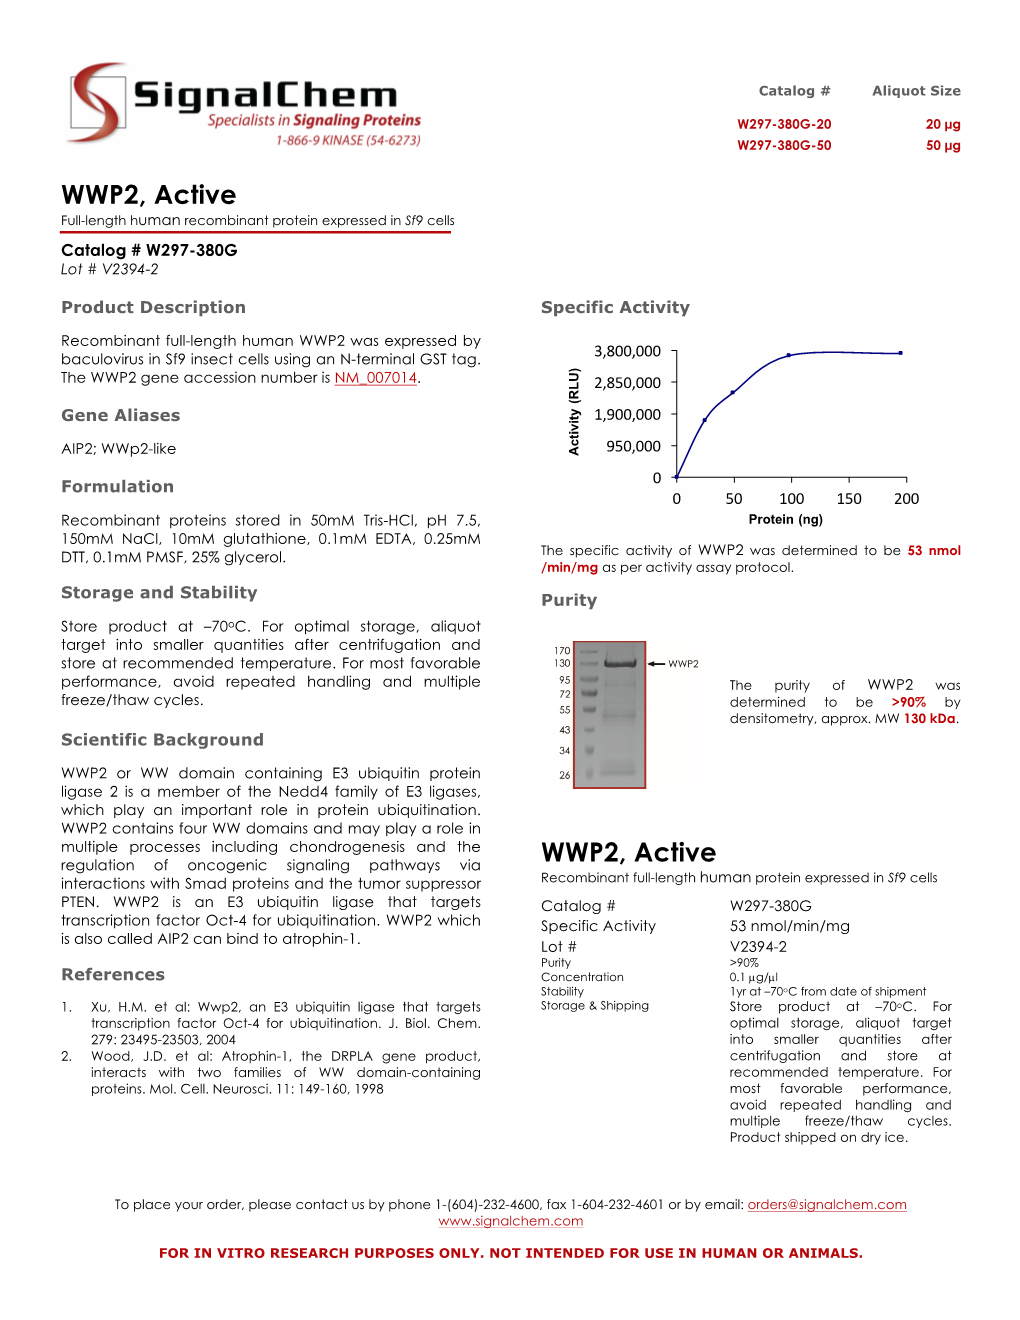 WWP2, Active Full-Length Human Recombinant Protein Expressed in Sf9 Cells